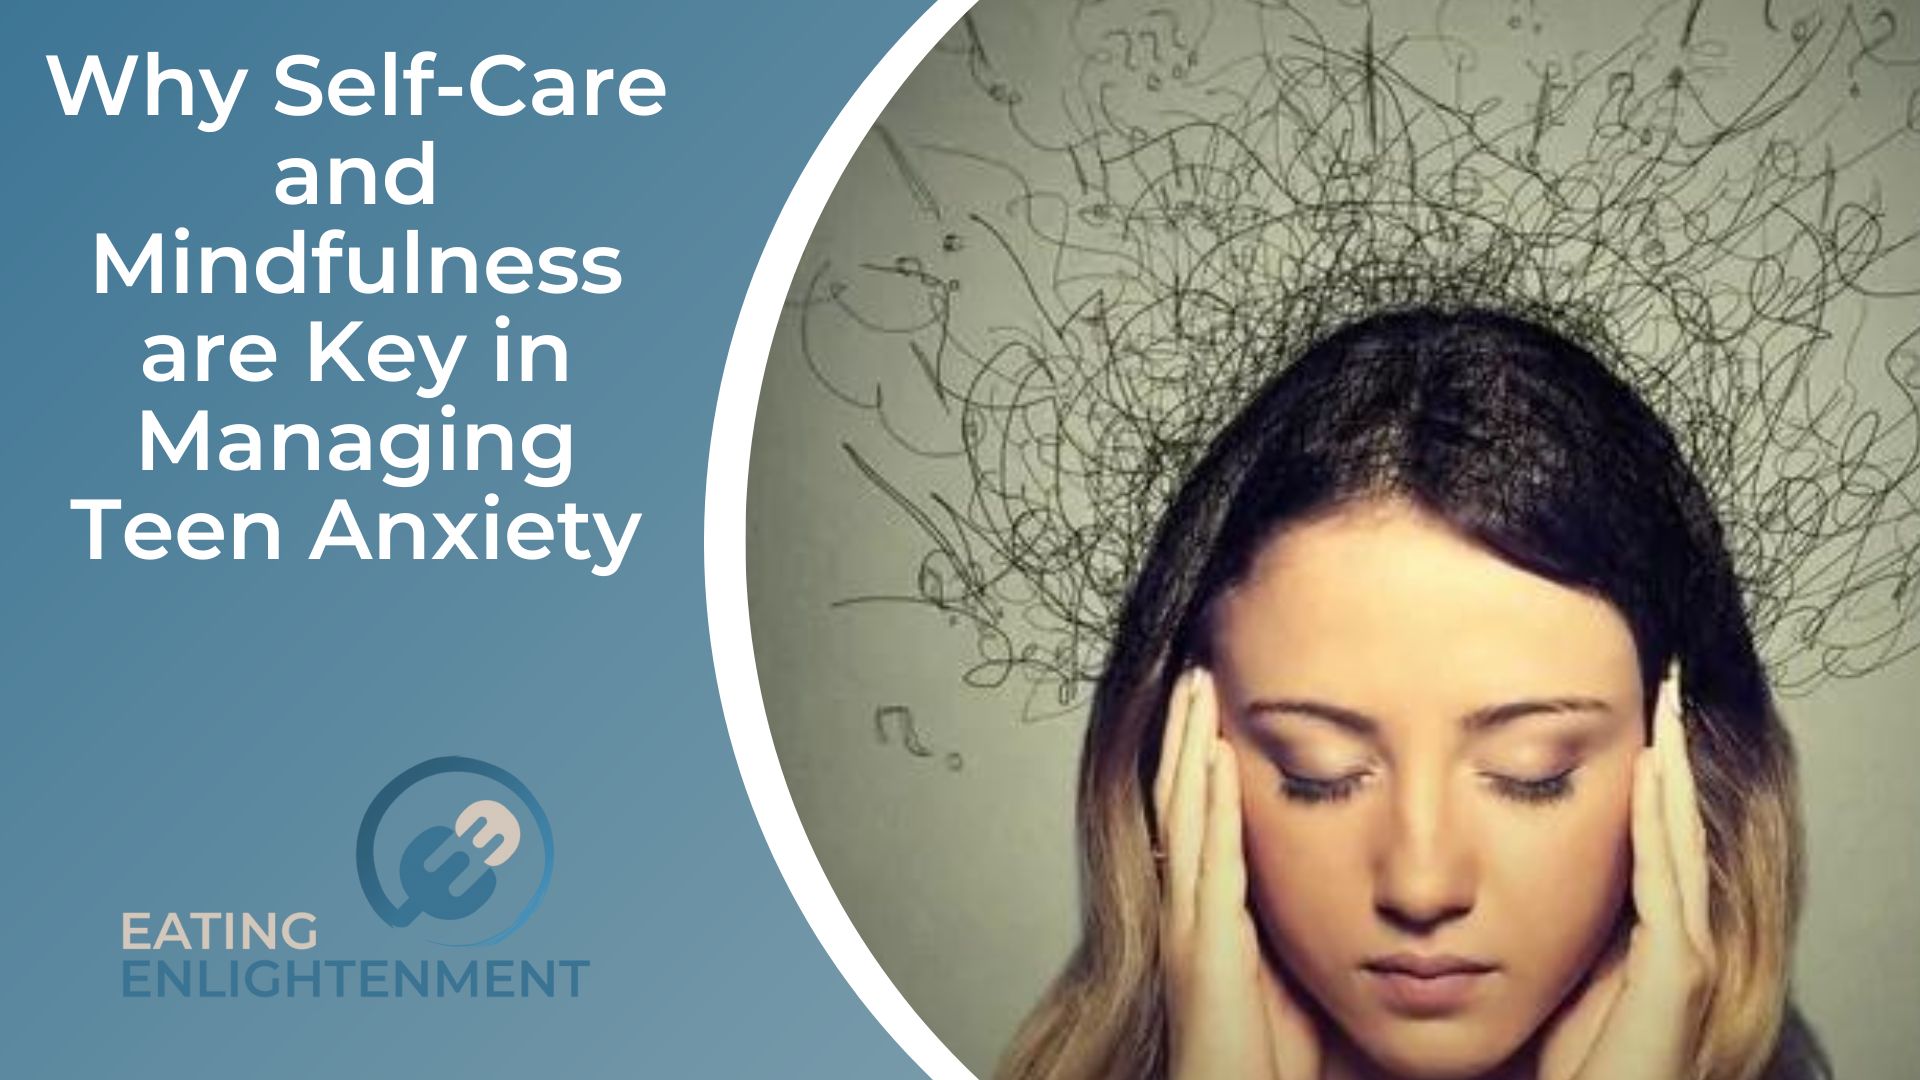 Why Self-Care and Mindfulness are Key in Managing Teen Anxiety